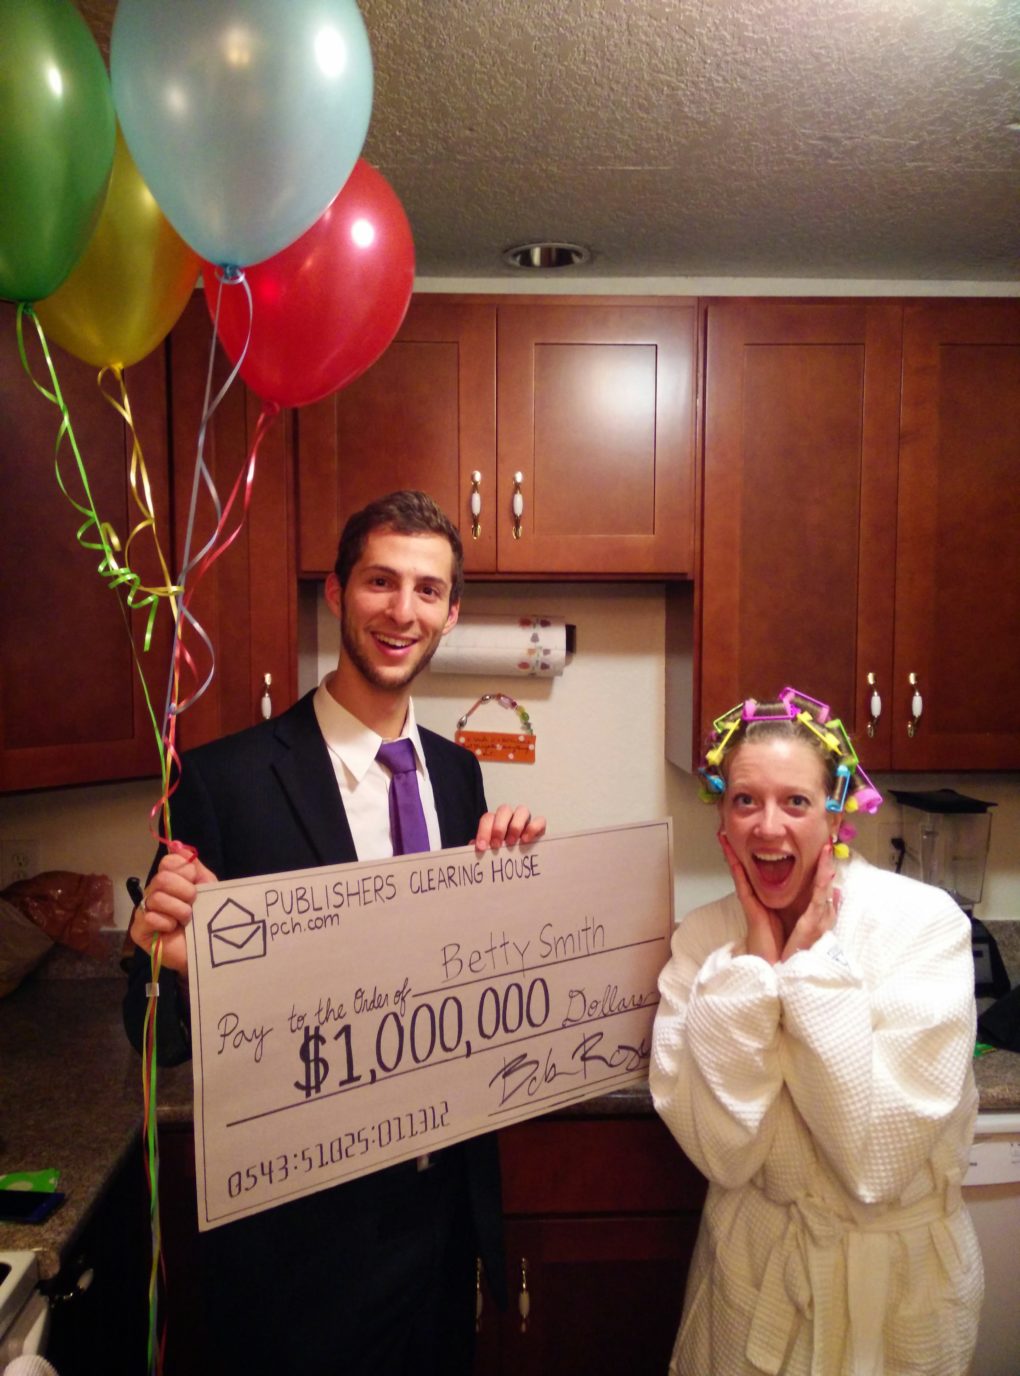 Publishers Clearing House and the winner. Couple Halloween costume ideas for you and your spouse or significant other. Cute and easy Halloween costumes for couples you can DIY or buy.